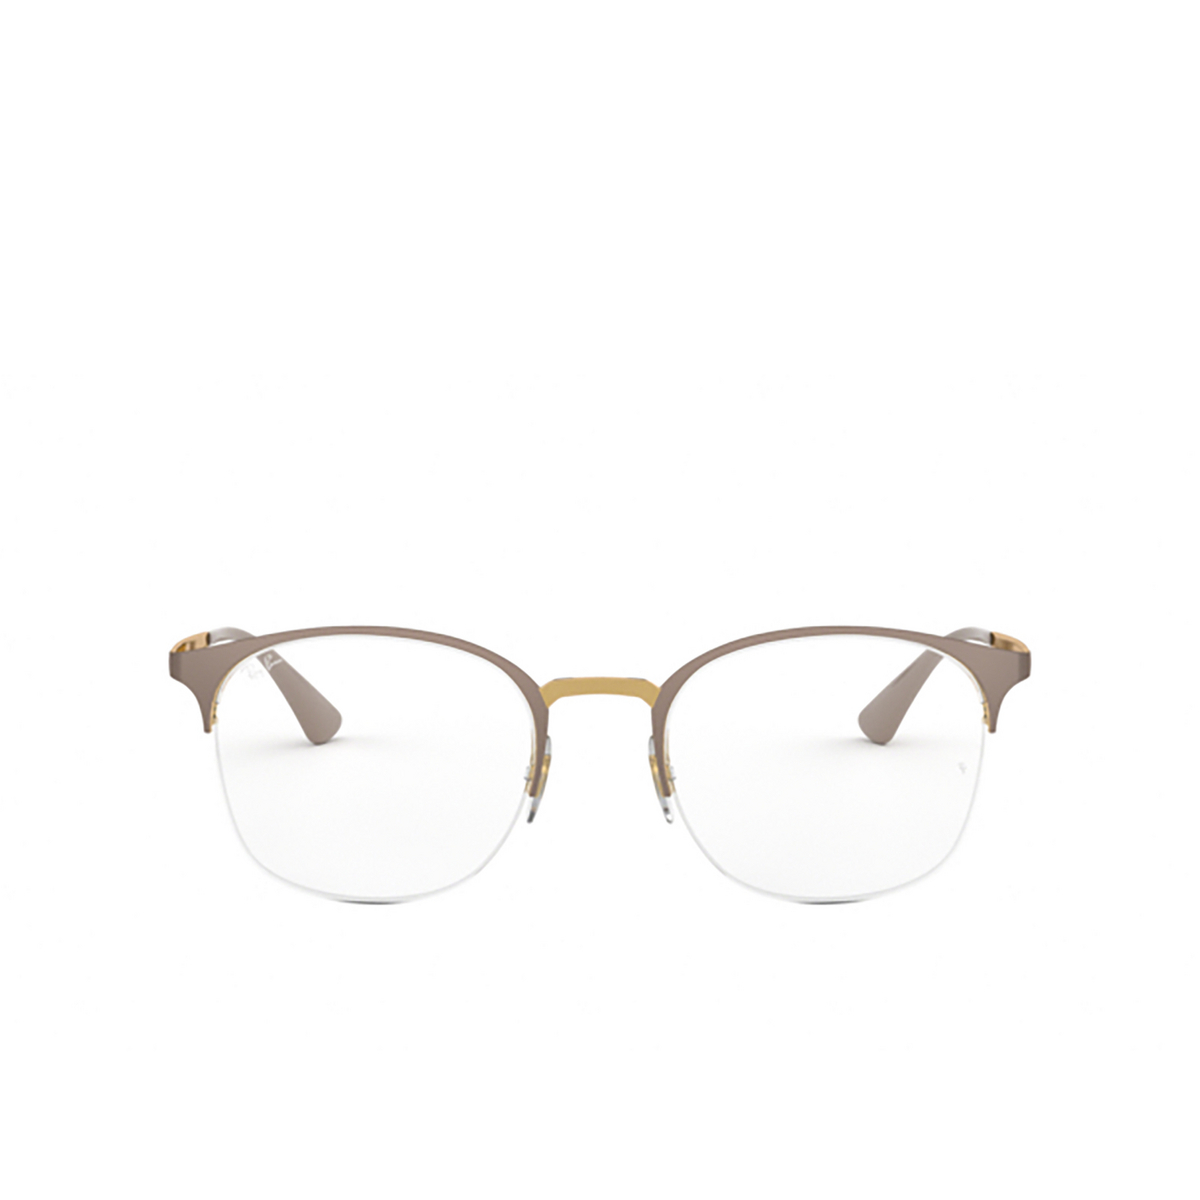 Ray-Ban RX6422 Eyeglasses 3005 GOLD ON TOP MATTE BEIGE - 1/4